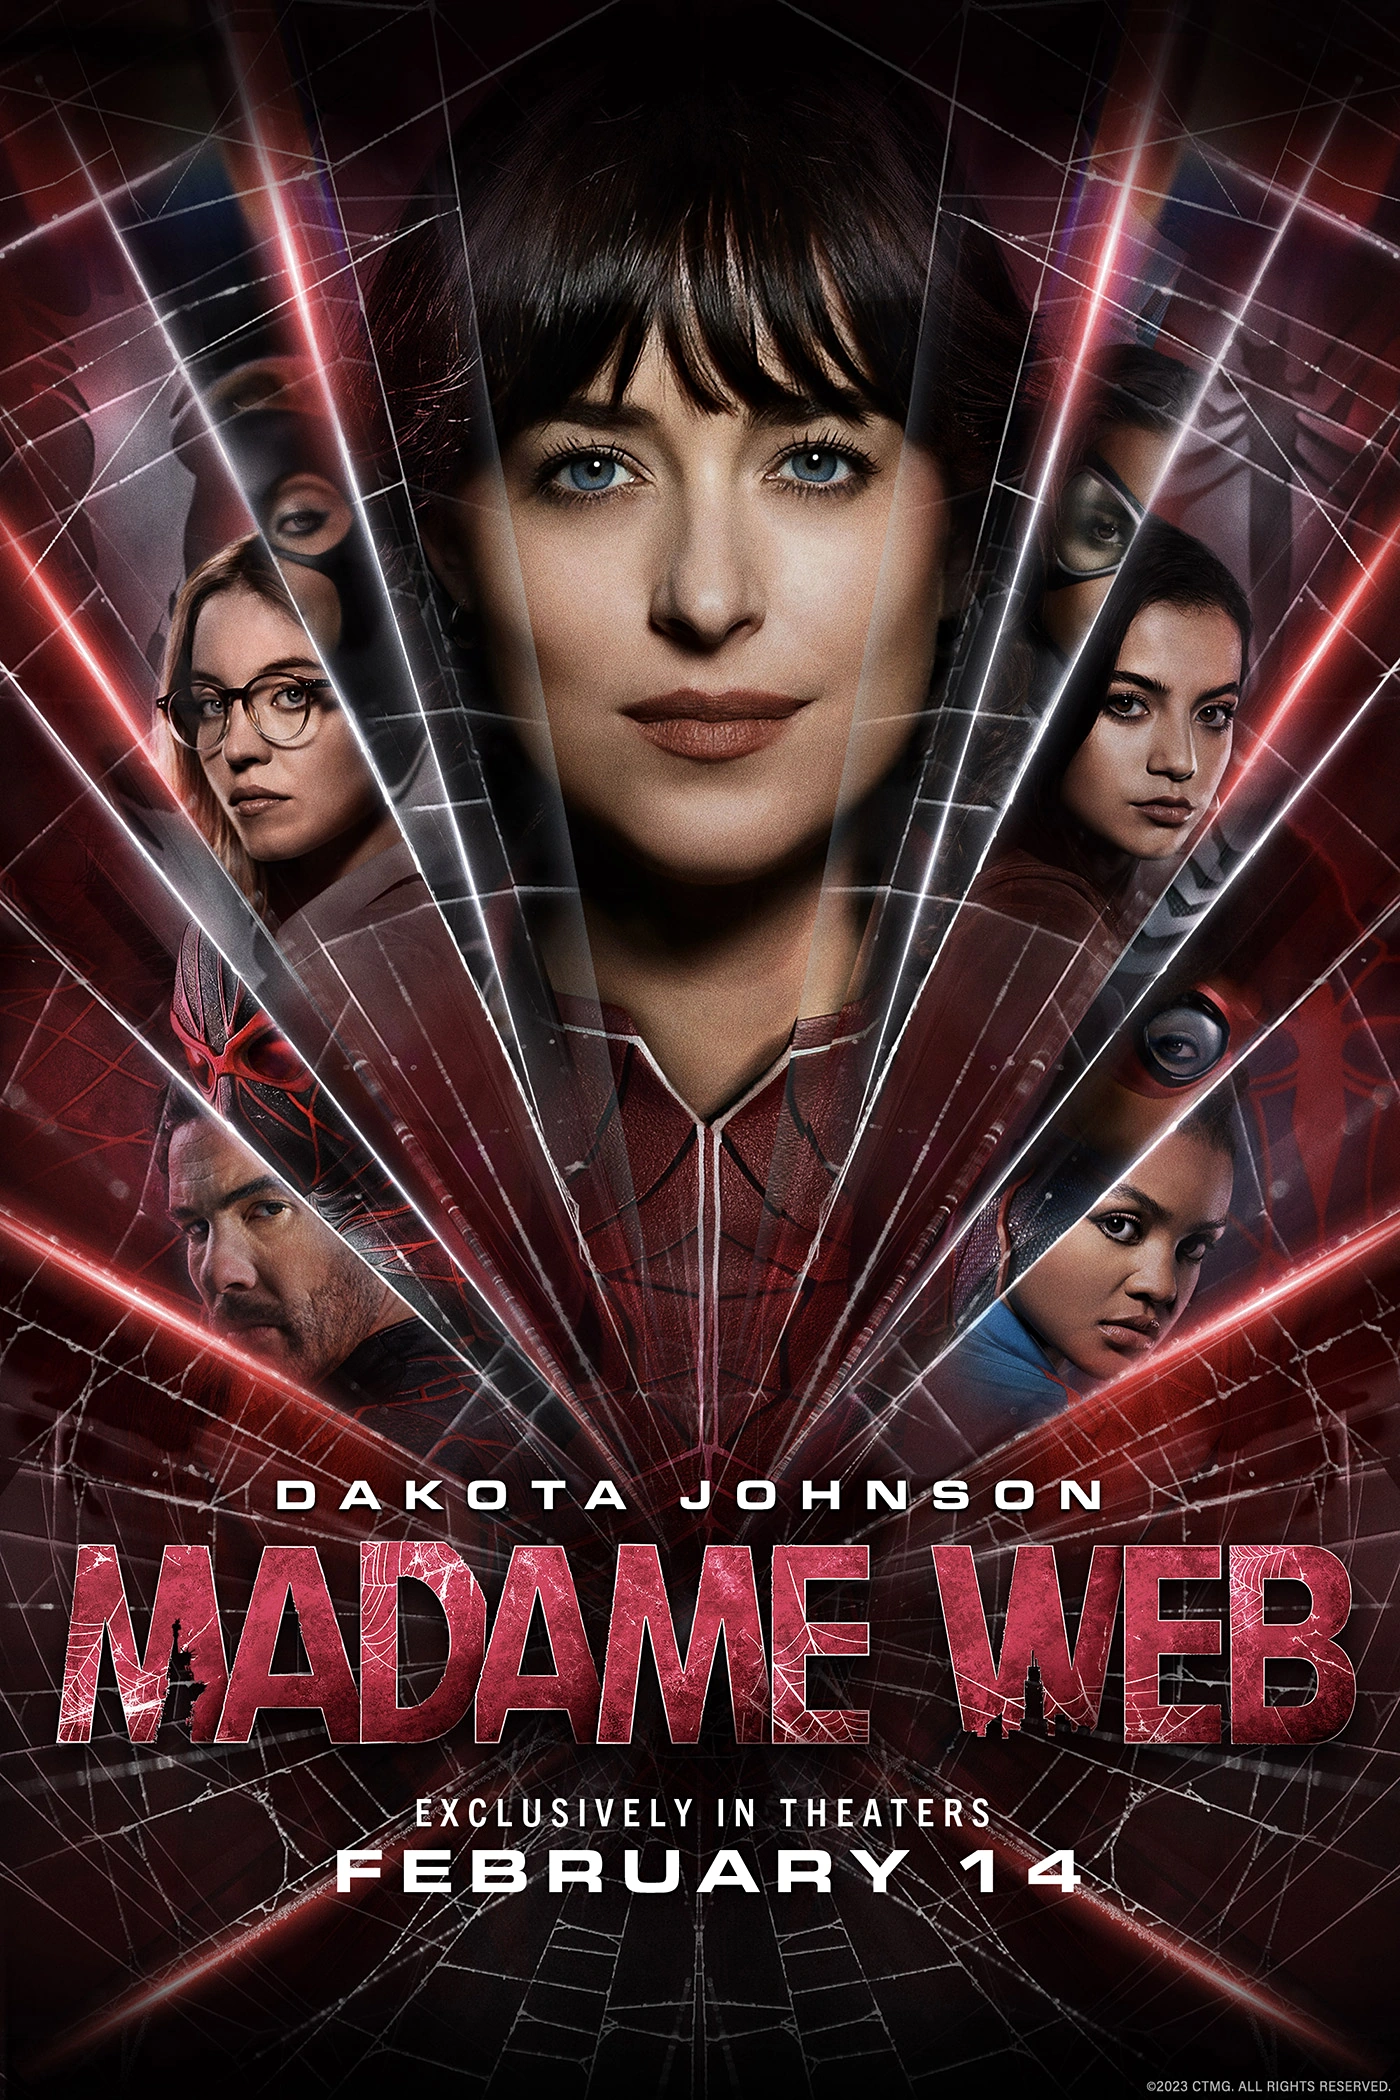 Movie Review: Marvel Studios and Sony empowers women with “Madame Web”